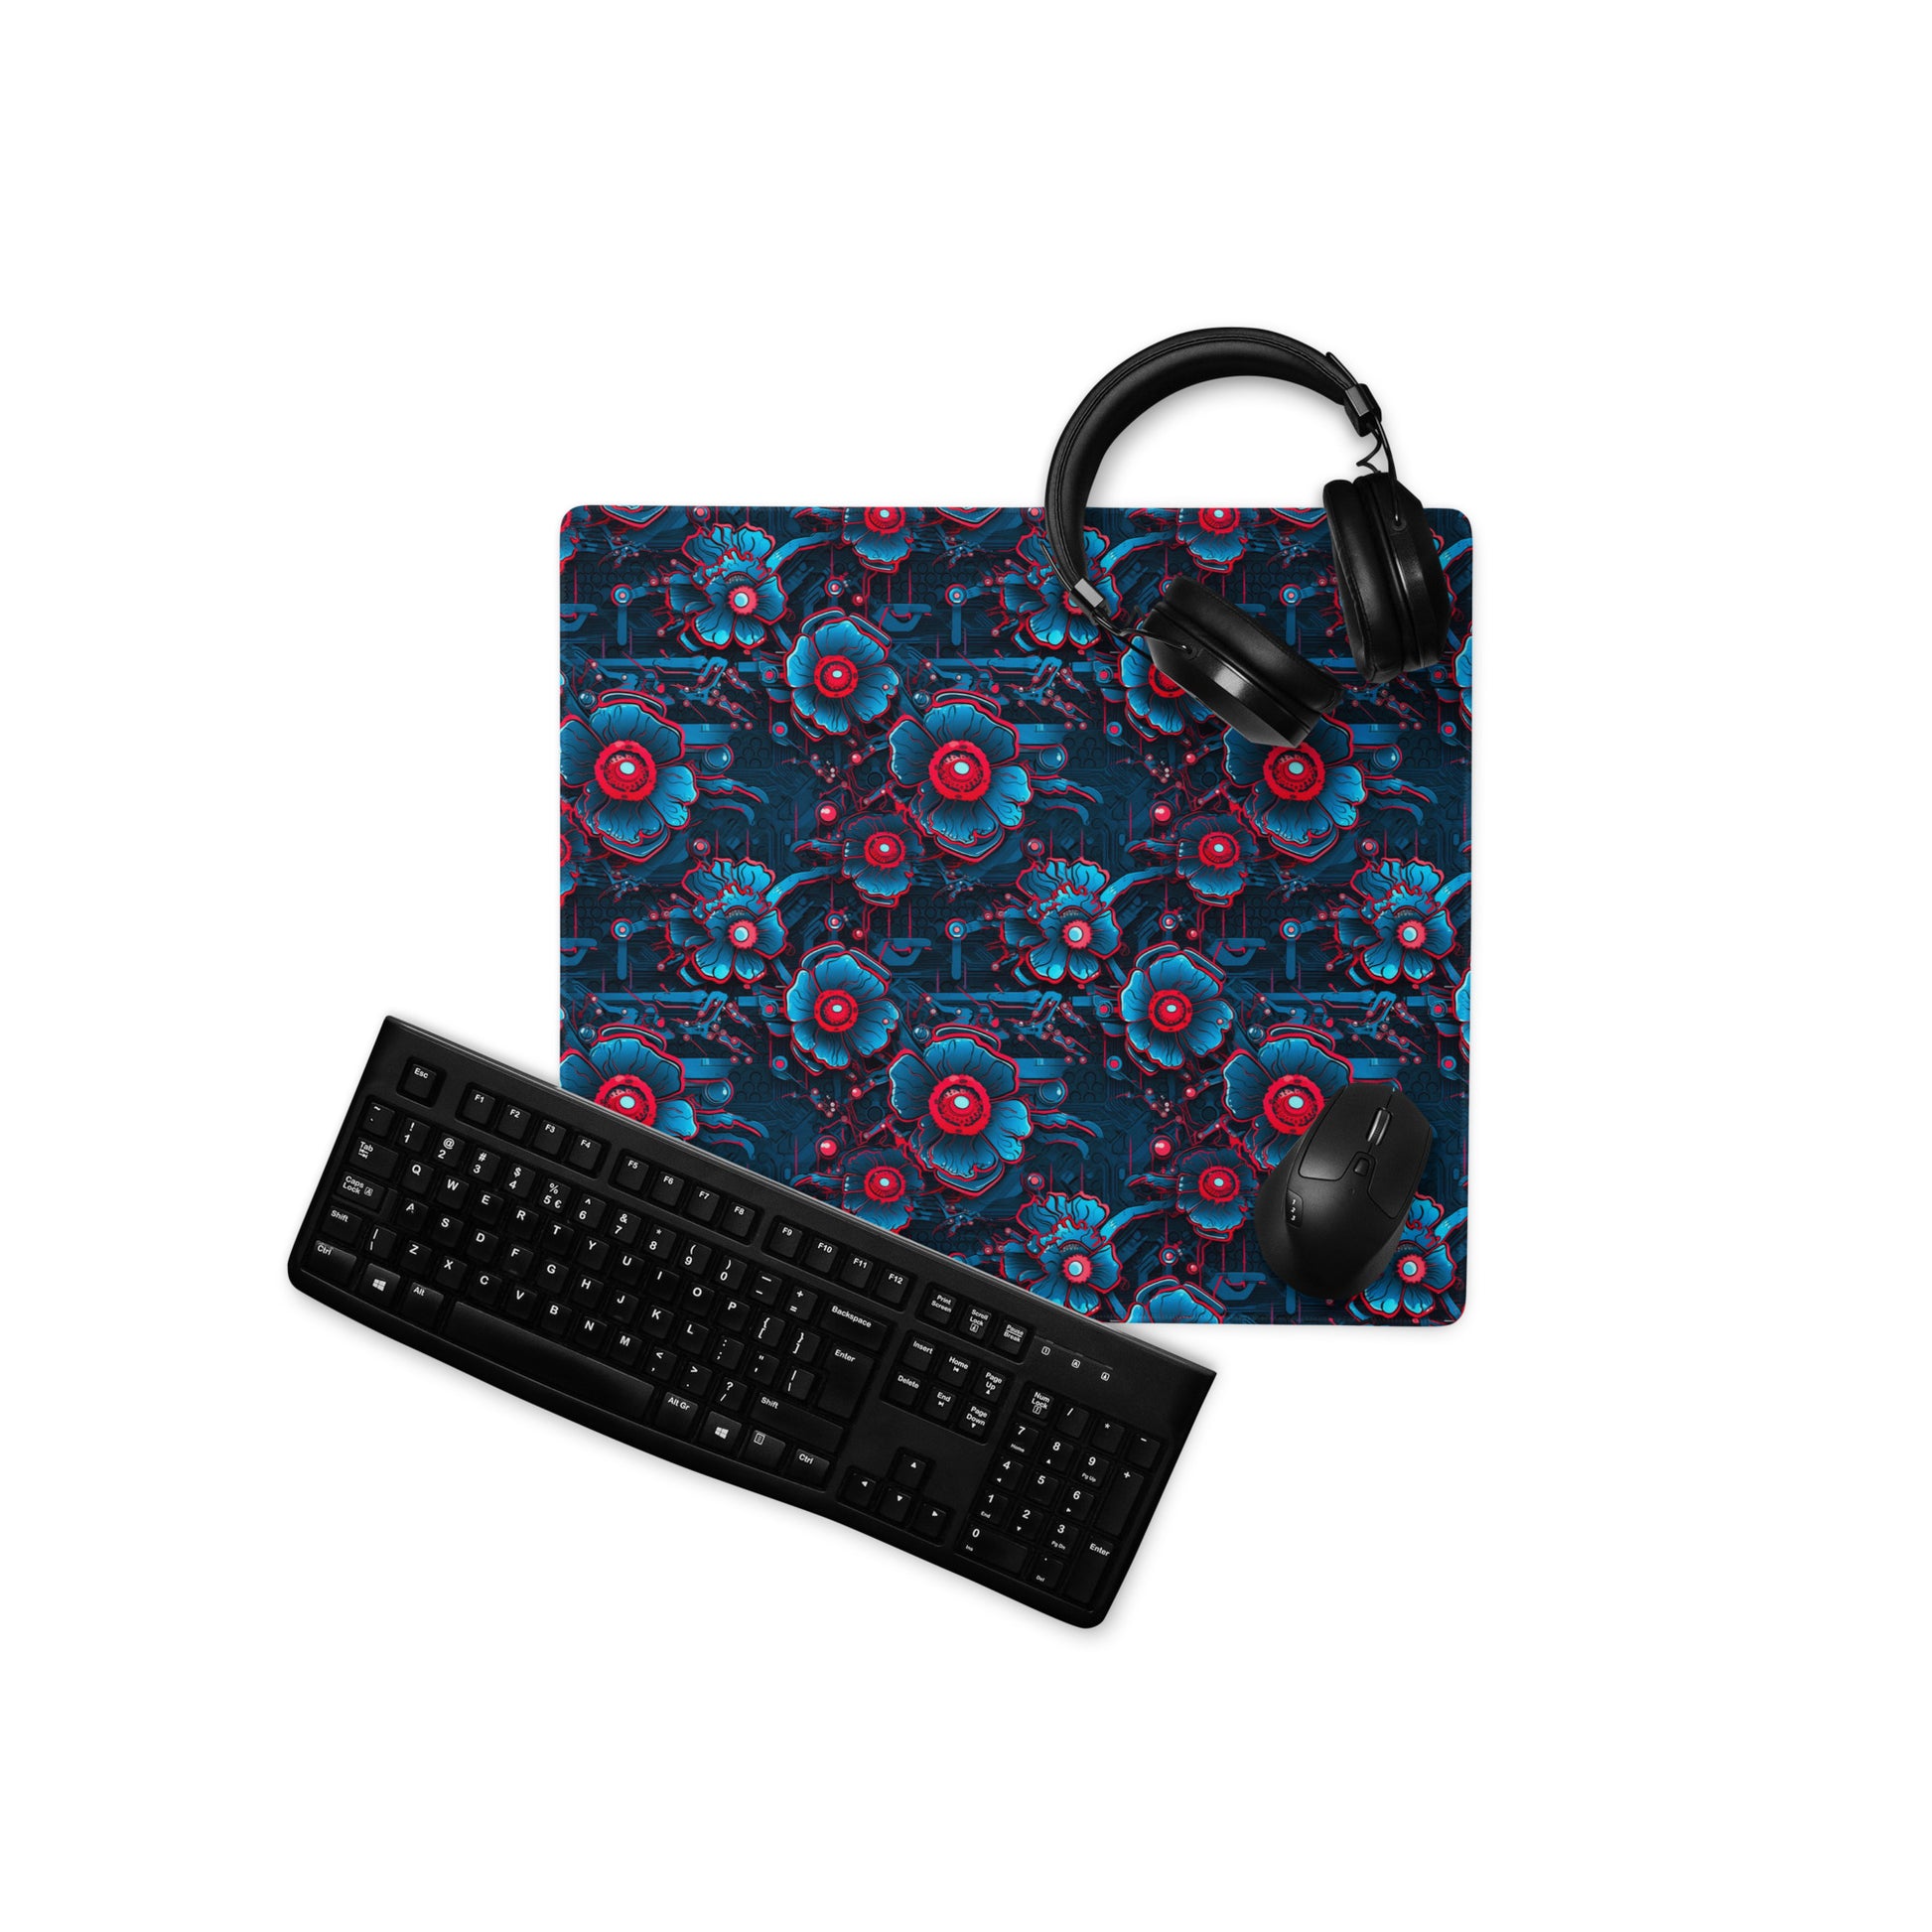 A 18" x 16" desk pad with a blue and red robotic floral pattern. With a keyboard, mouse, and headphones sitting on it.